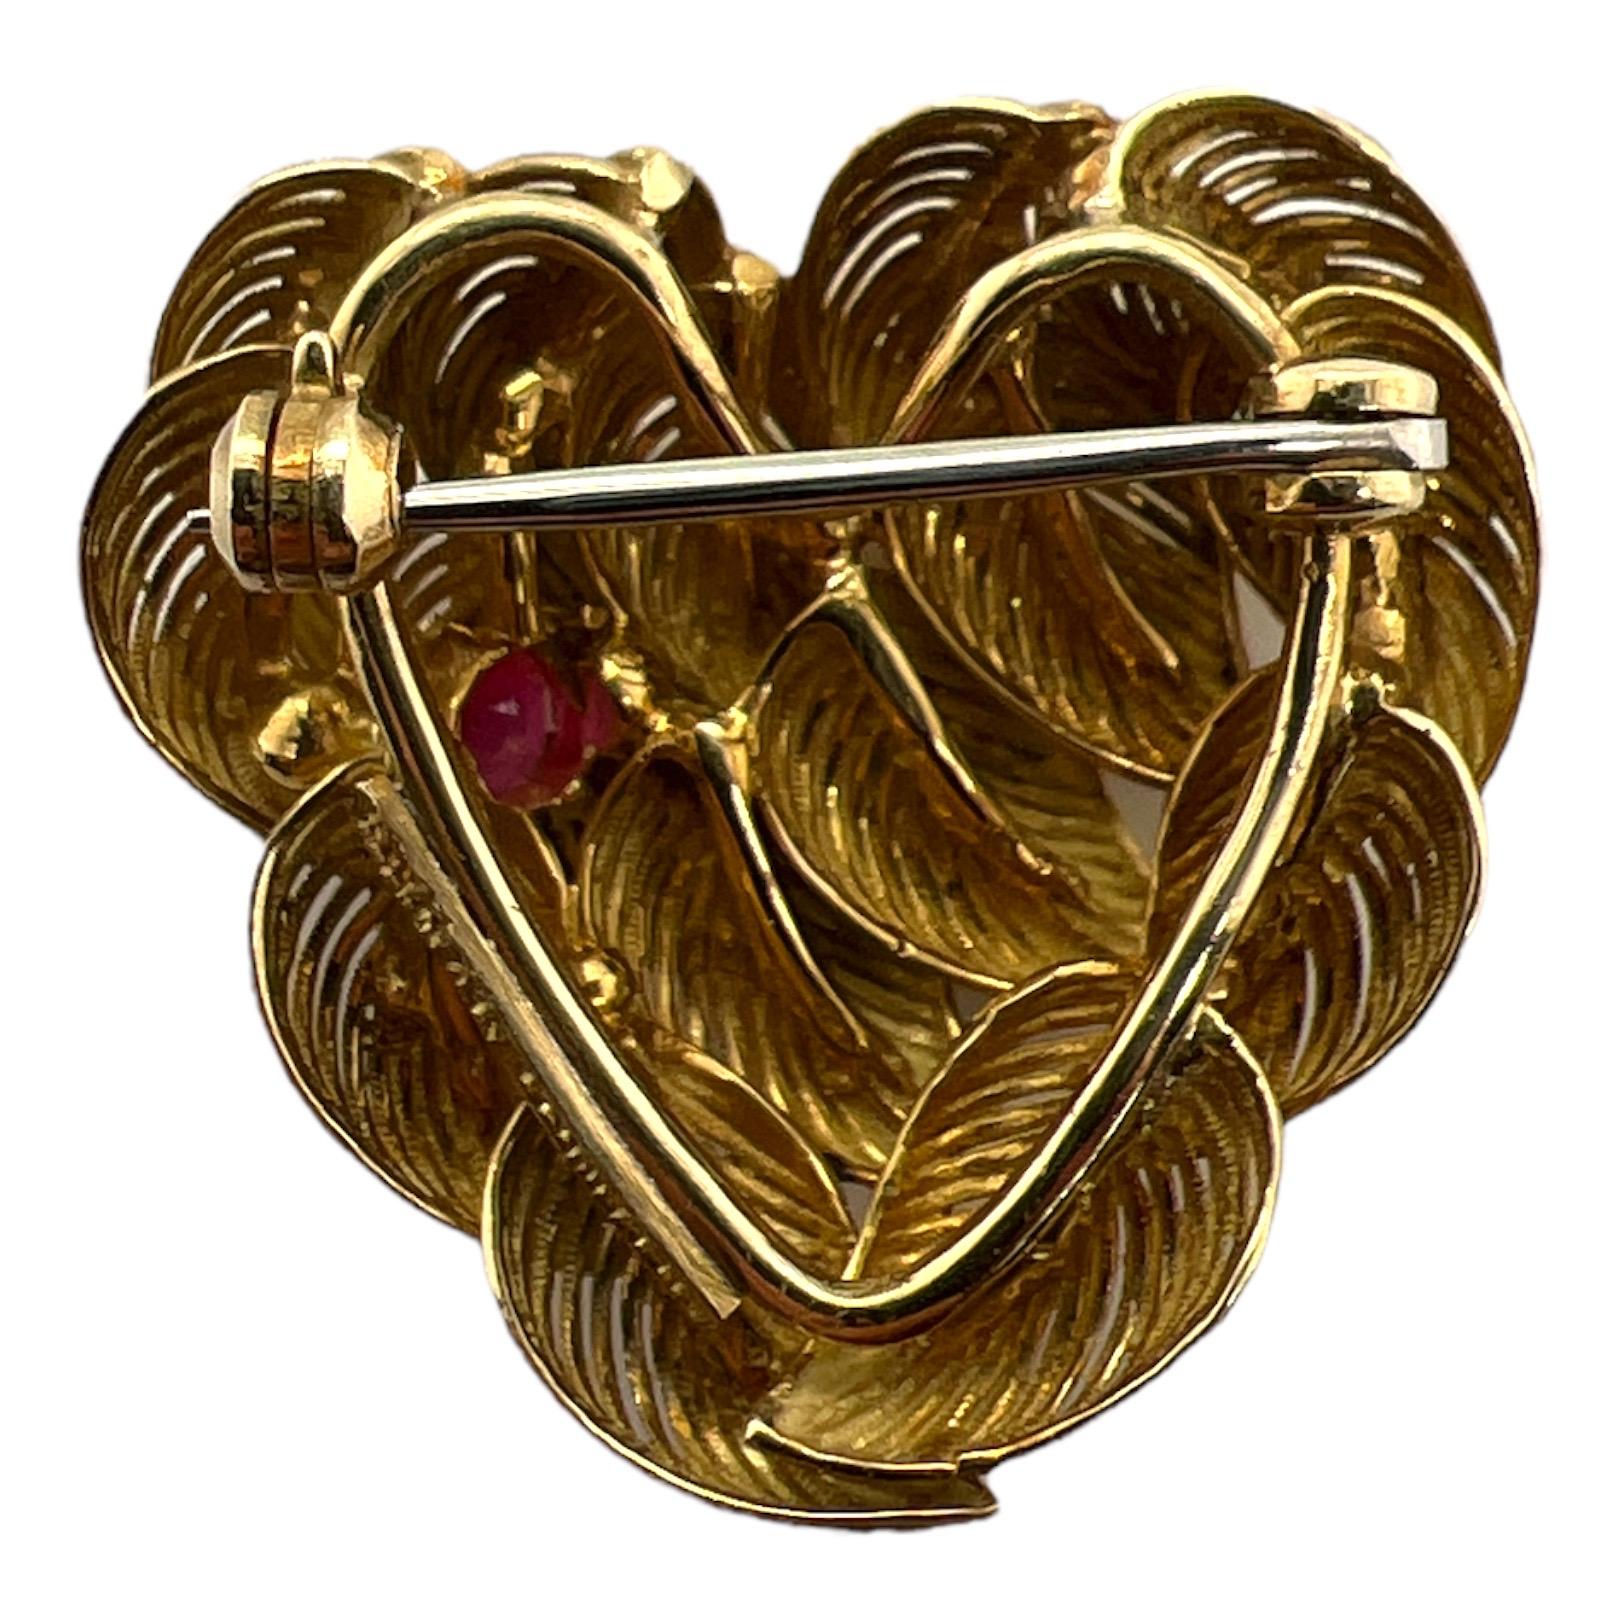 Beautifully crafted ruby heart brooch by Tiffany & Co. The rare vintage heart is made of overlapping leaves and features a single ruby. The brooch measures approximately 28 x 28mm. 